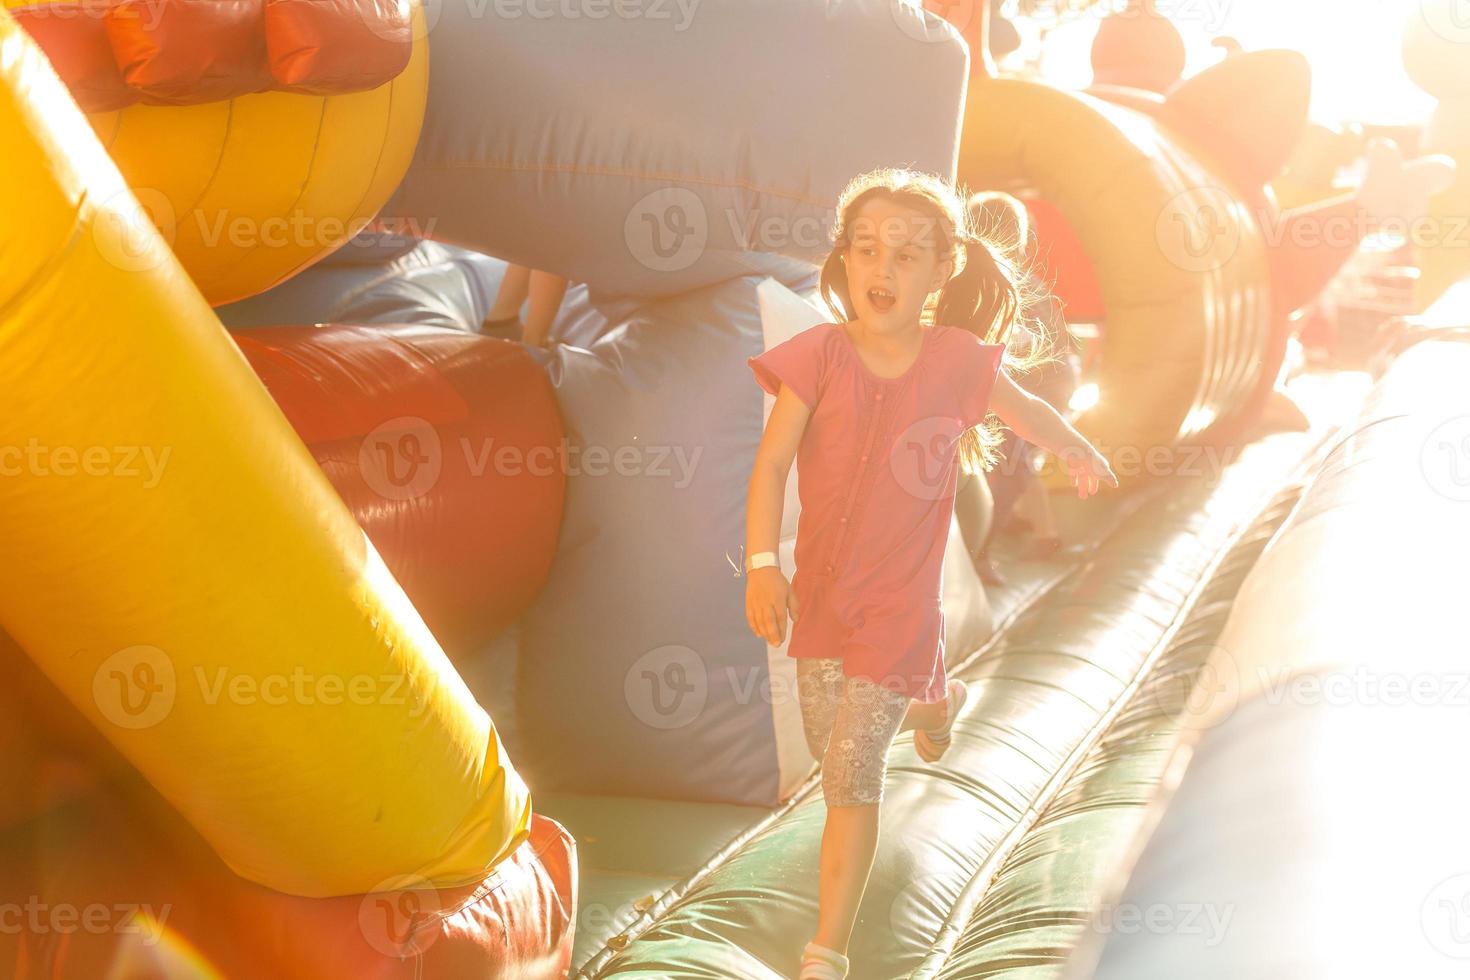 Happy little girl having lots of fun on a jumping castle during sliding photo